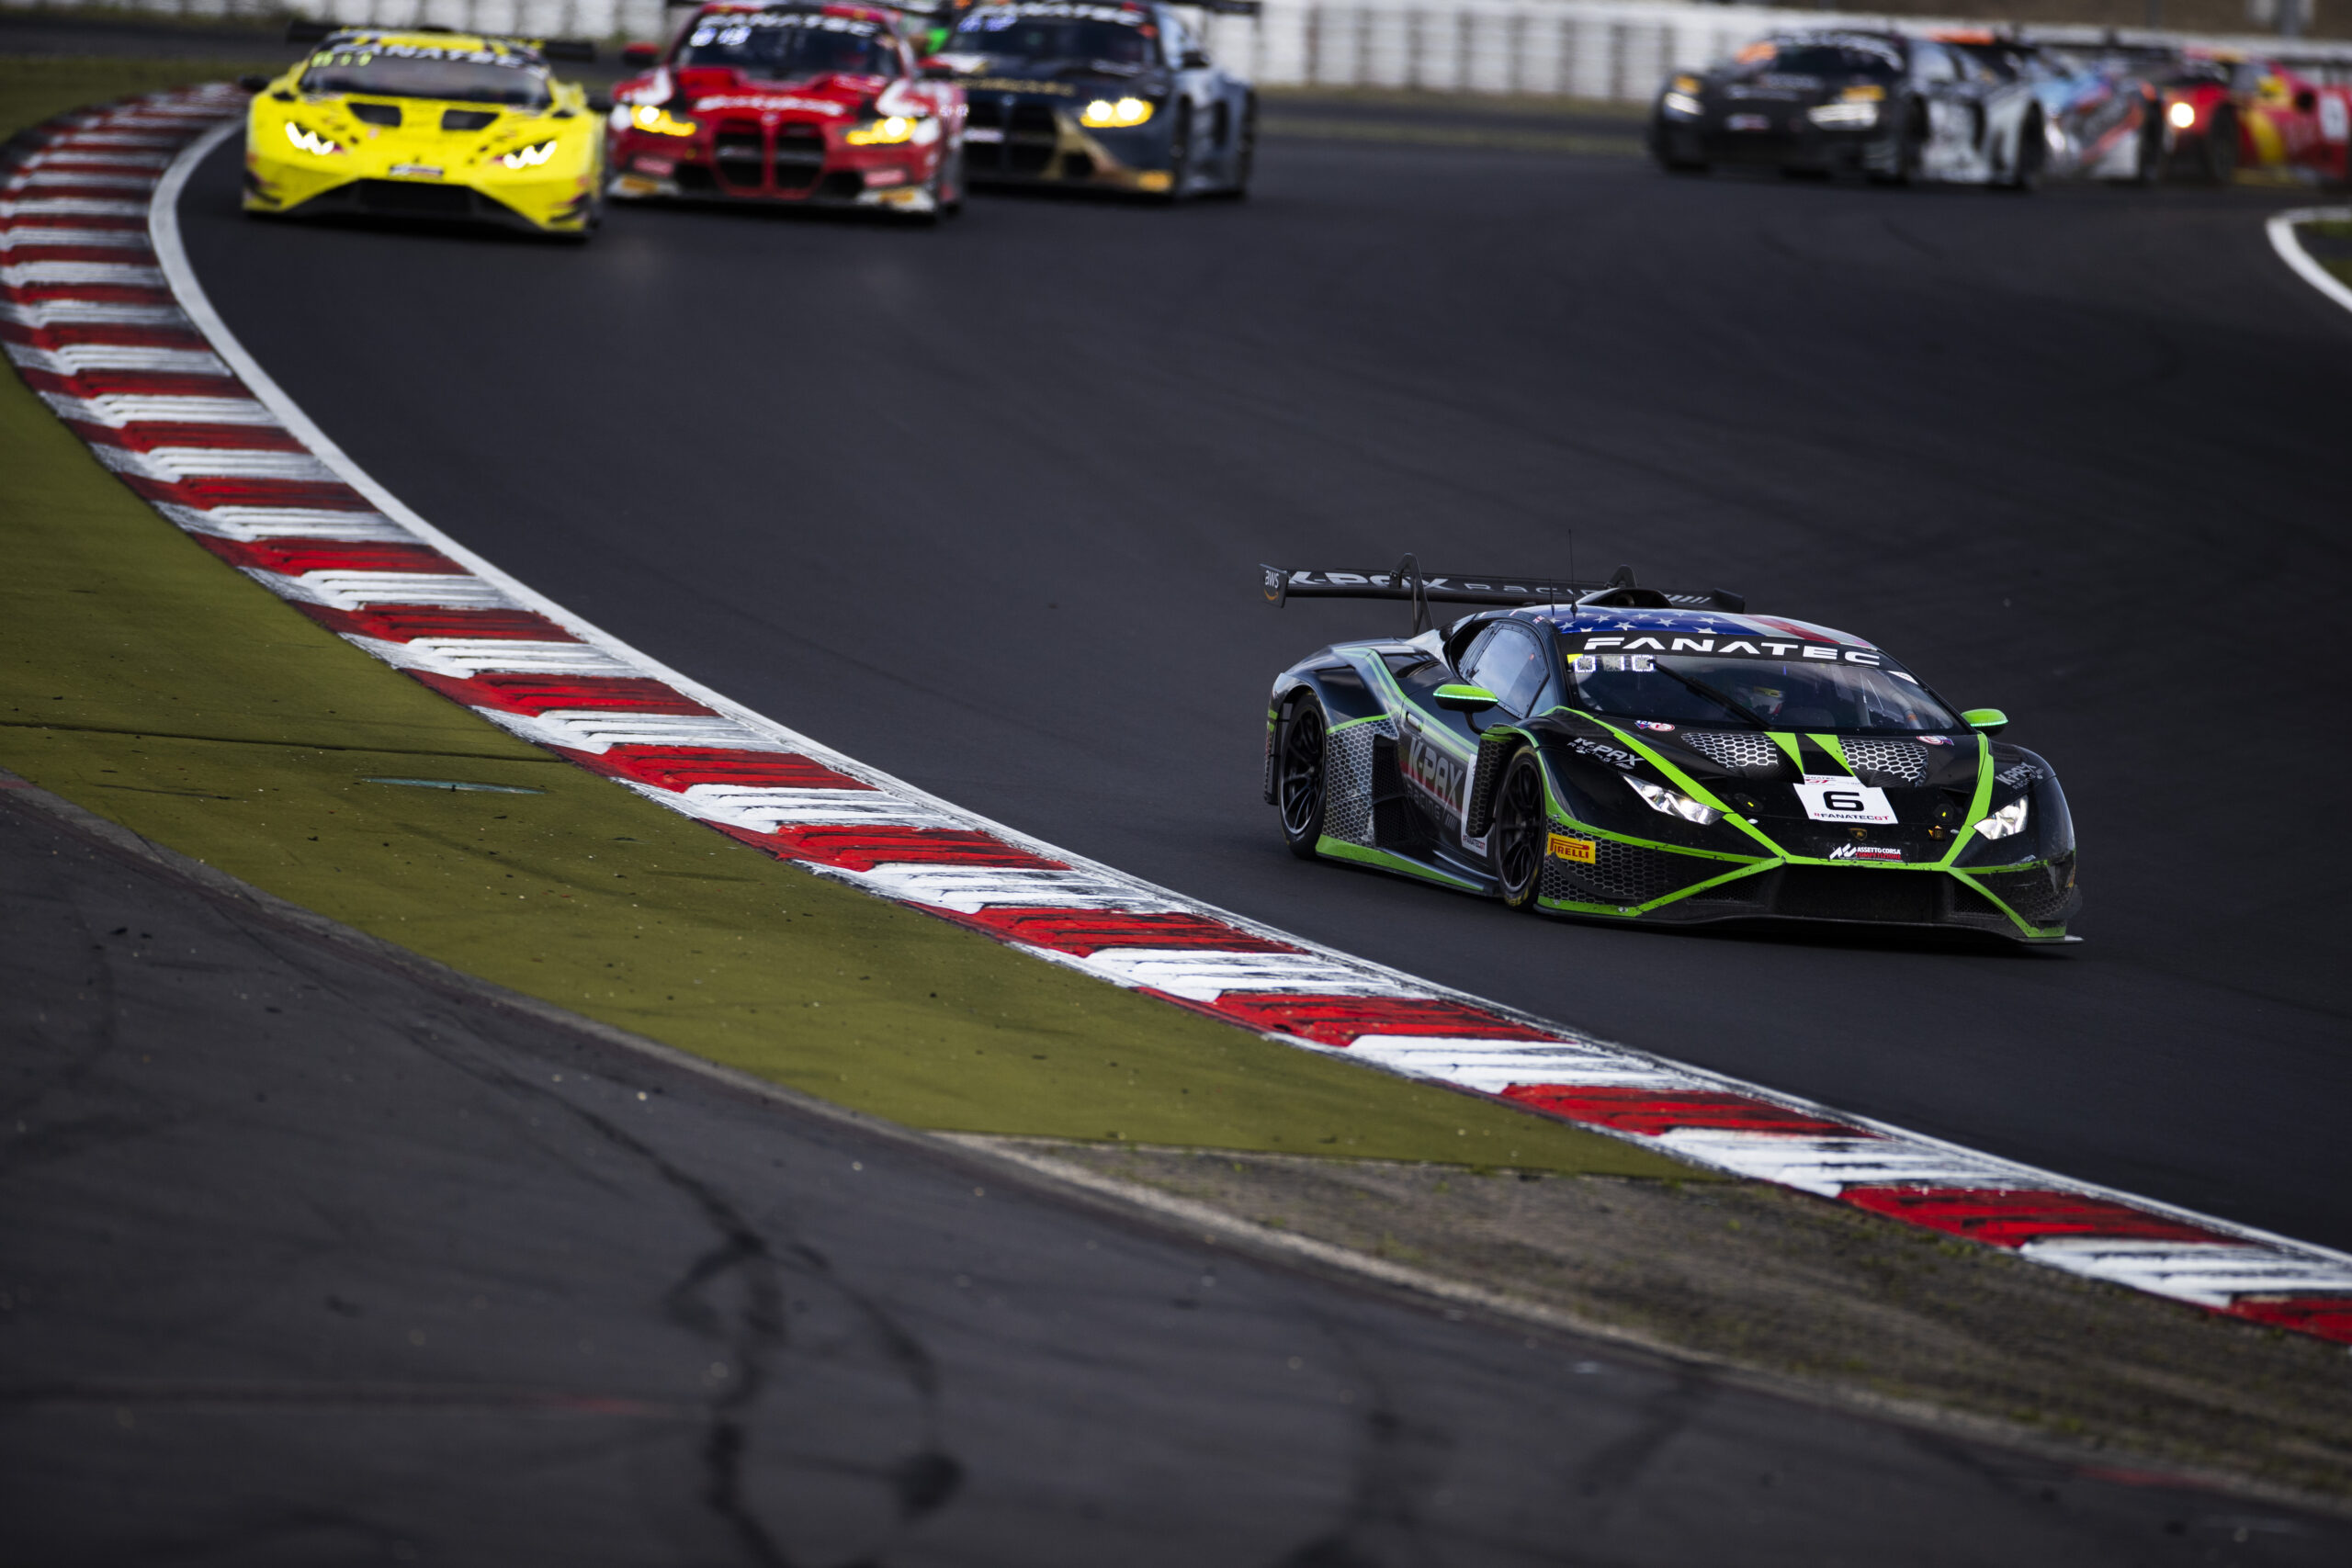 Points and prizes for K-PAX at Nuburgring but podium proves elusive